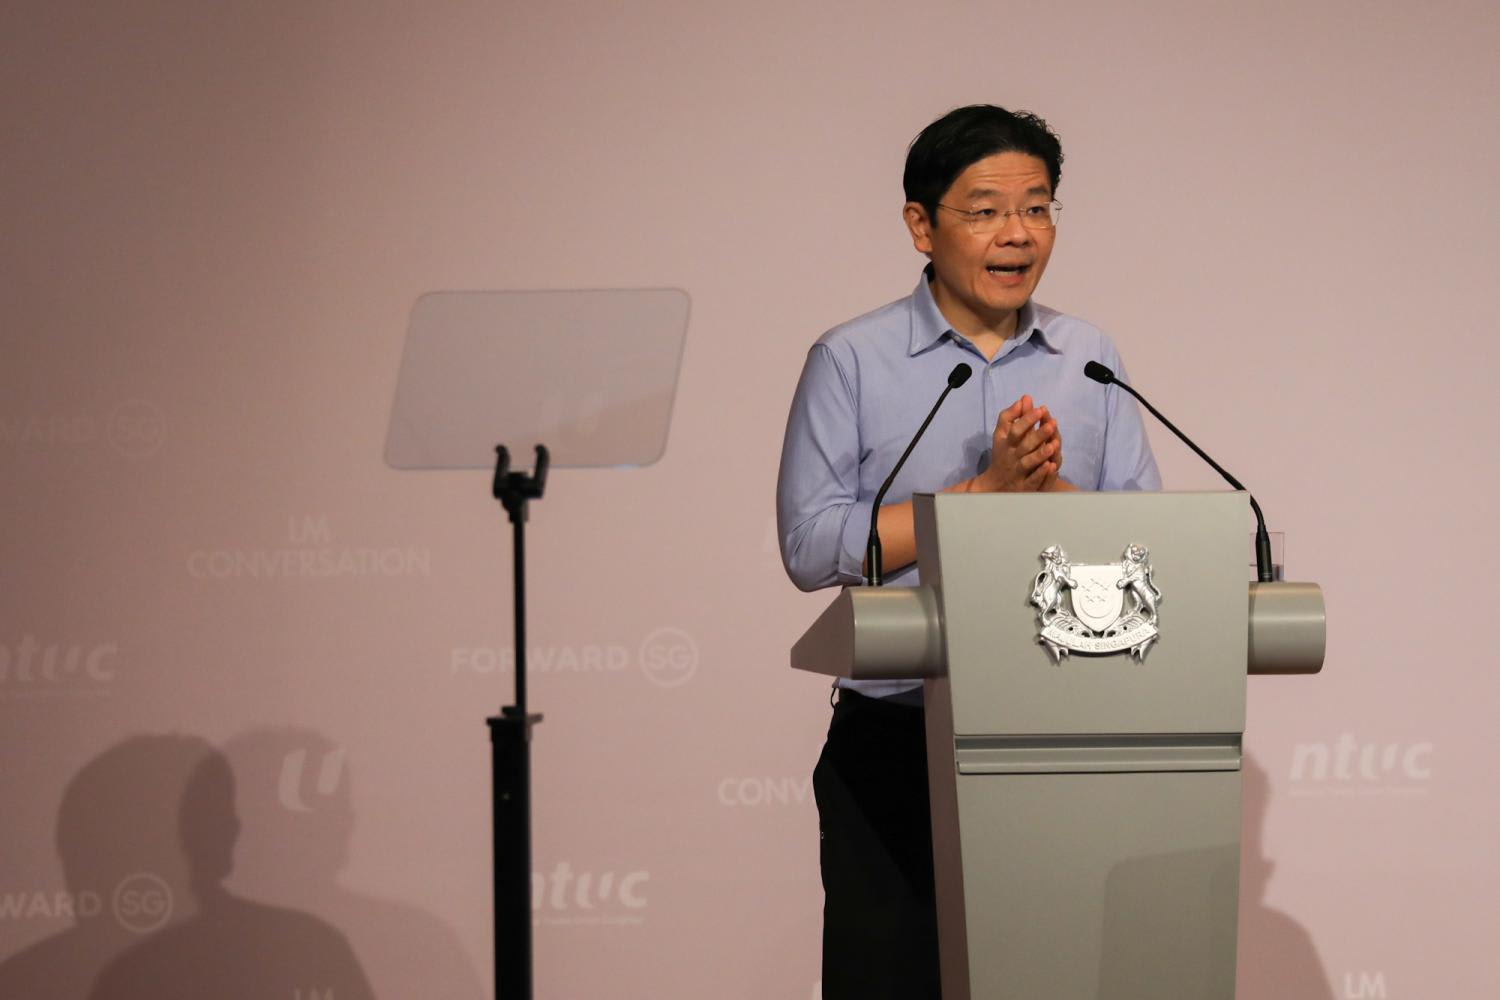 A study found that people with higher educational qualifications of at least a university degree had greater trust that Deputy Prime Minister Lawrence Wong (pictured) was the best possible fourth-generation political leader.